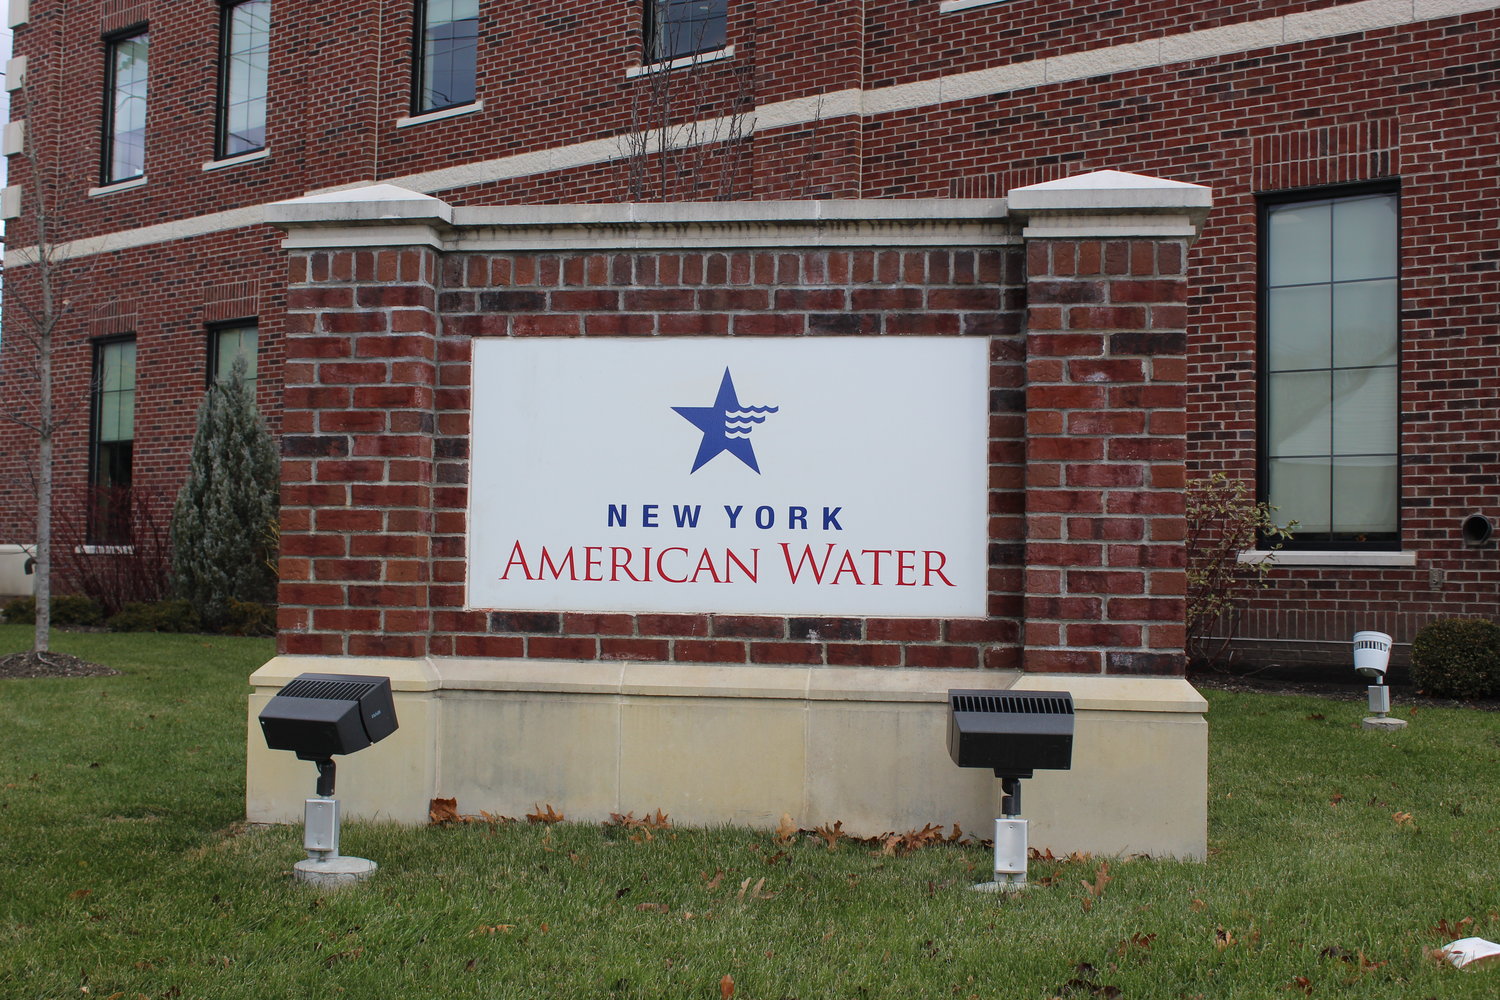 The State Public Service Commission approved the sale of NYAW to Liberty on Dec. 16, outlining a specific timeline and path to public water for North Shore municipalities, including Sea Cliff.